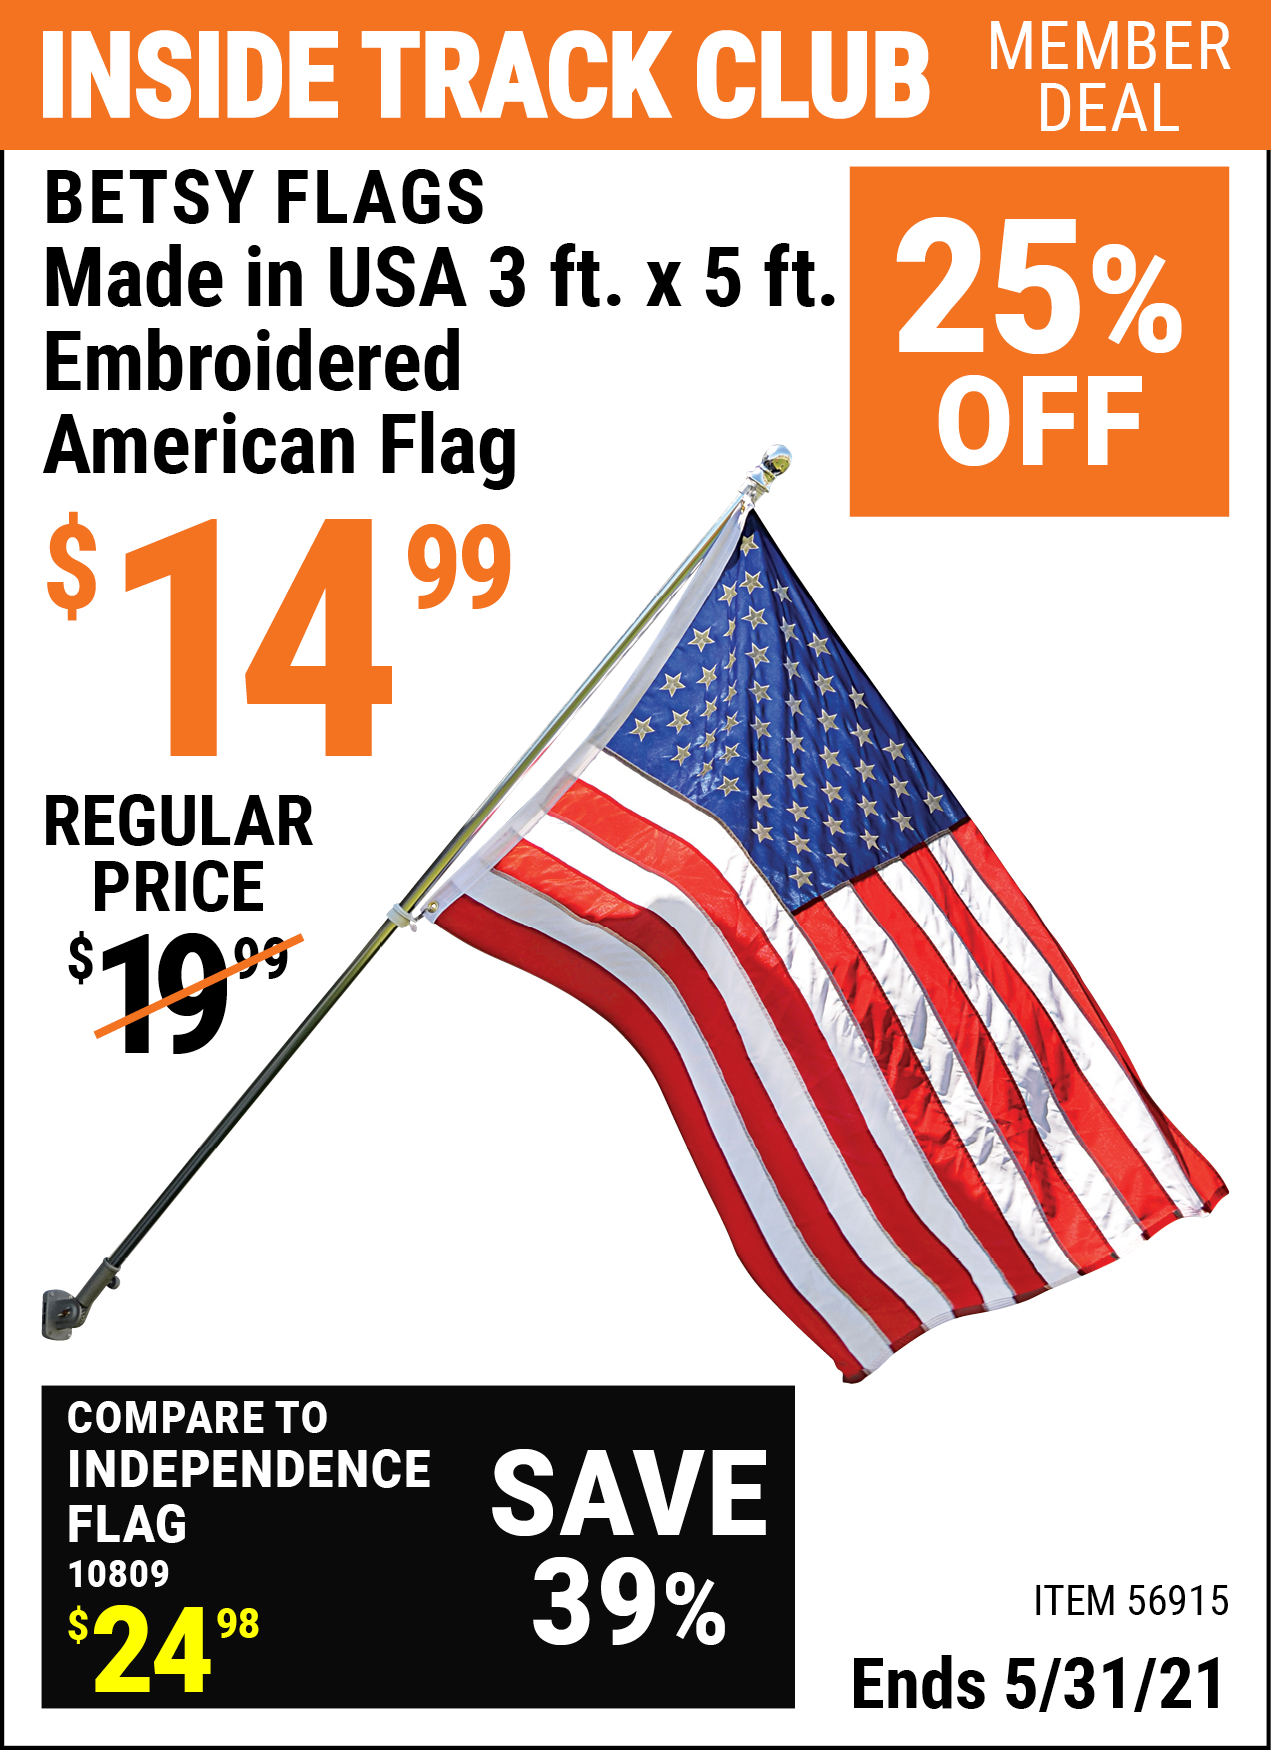 Inside Track Club members can buy the BETSY FLAGS 3 ft. x 5 ft. Embroidered American Flag (Item 56915) for $14.99, valid through 5/31/2021.